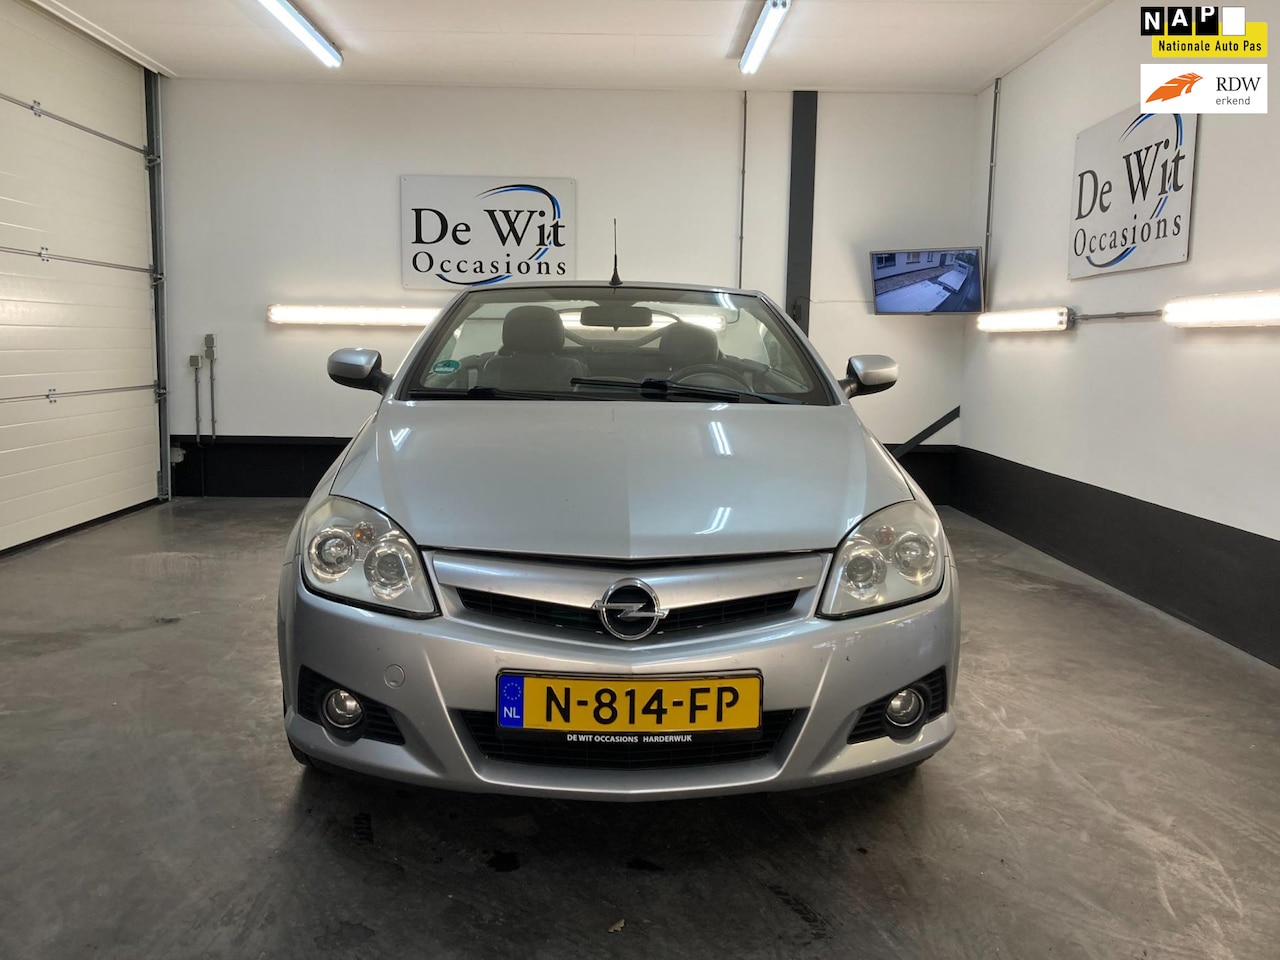 opel tigra twintop grau used – Search for your used car on the parking